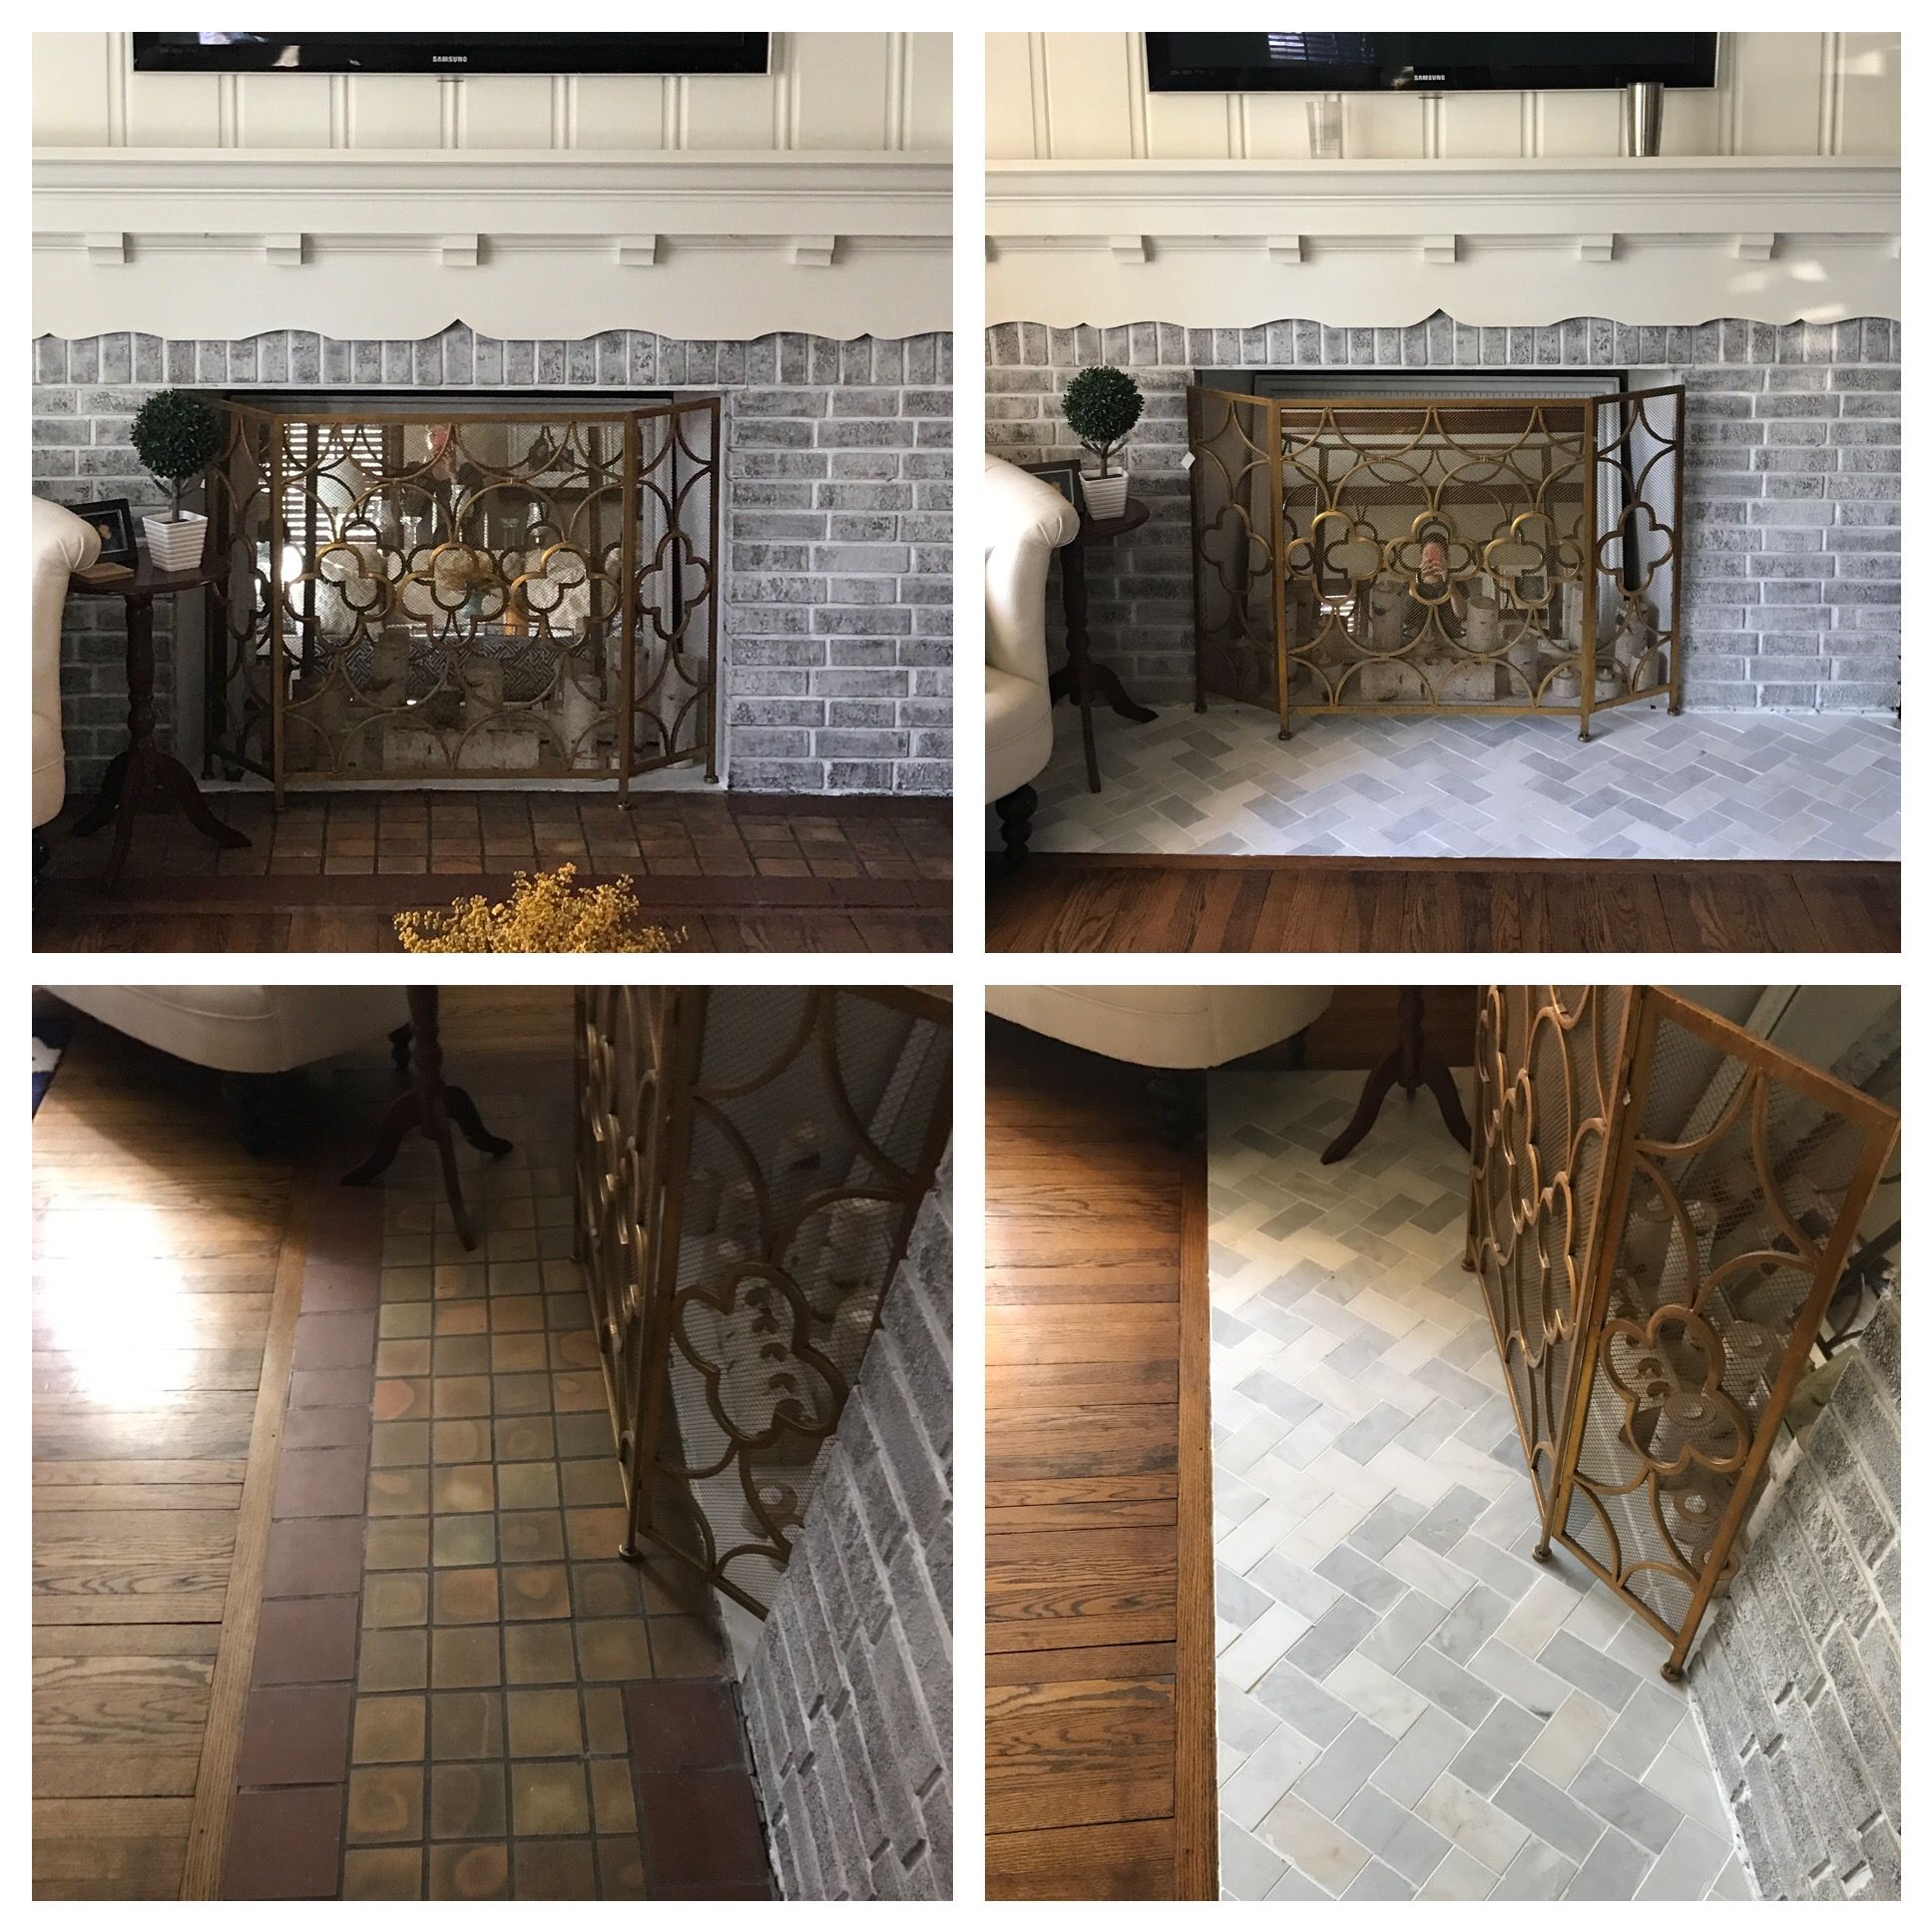 Porcelain Tile Fireplace Beautiful Fireplace Floor Tile before and after White Grecian Tile